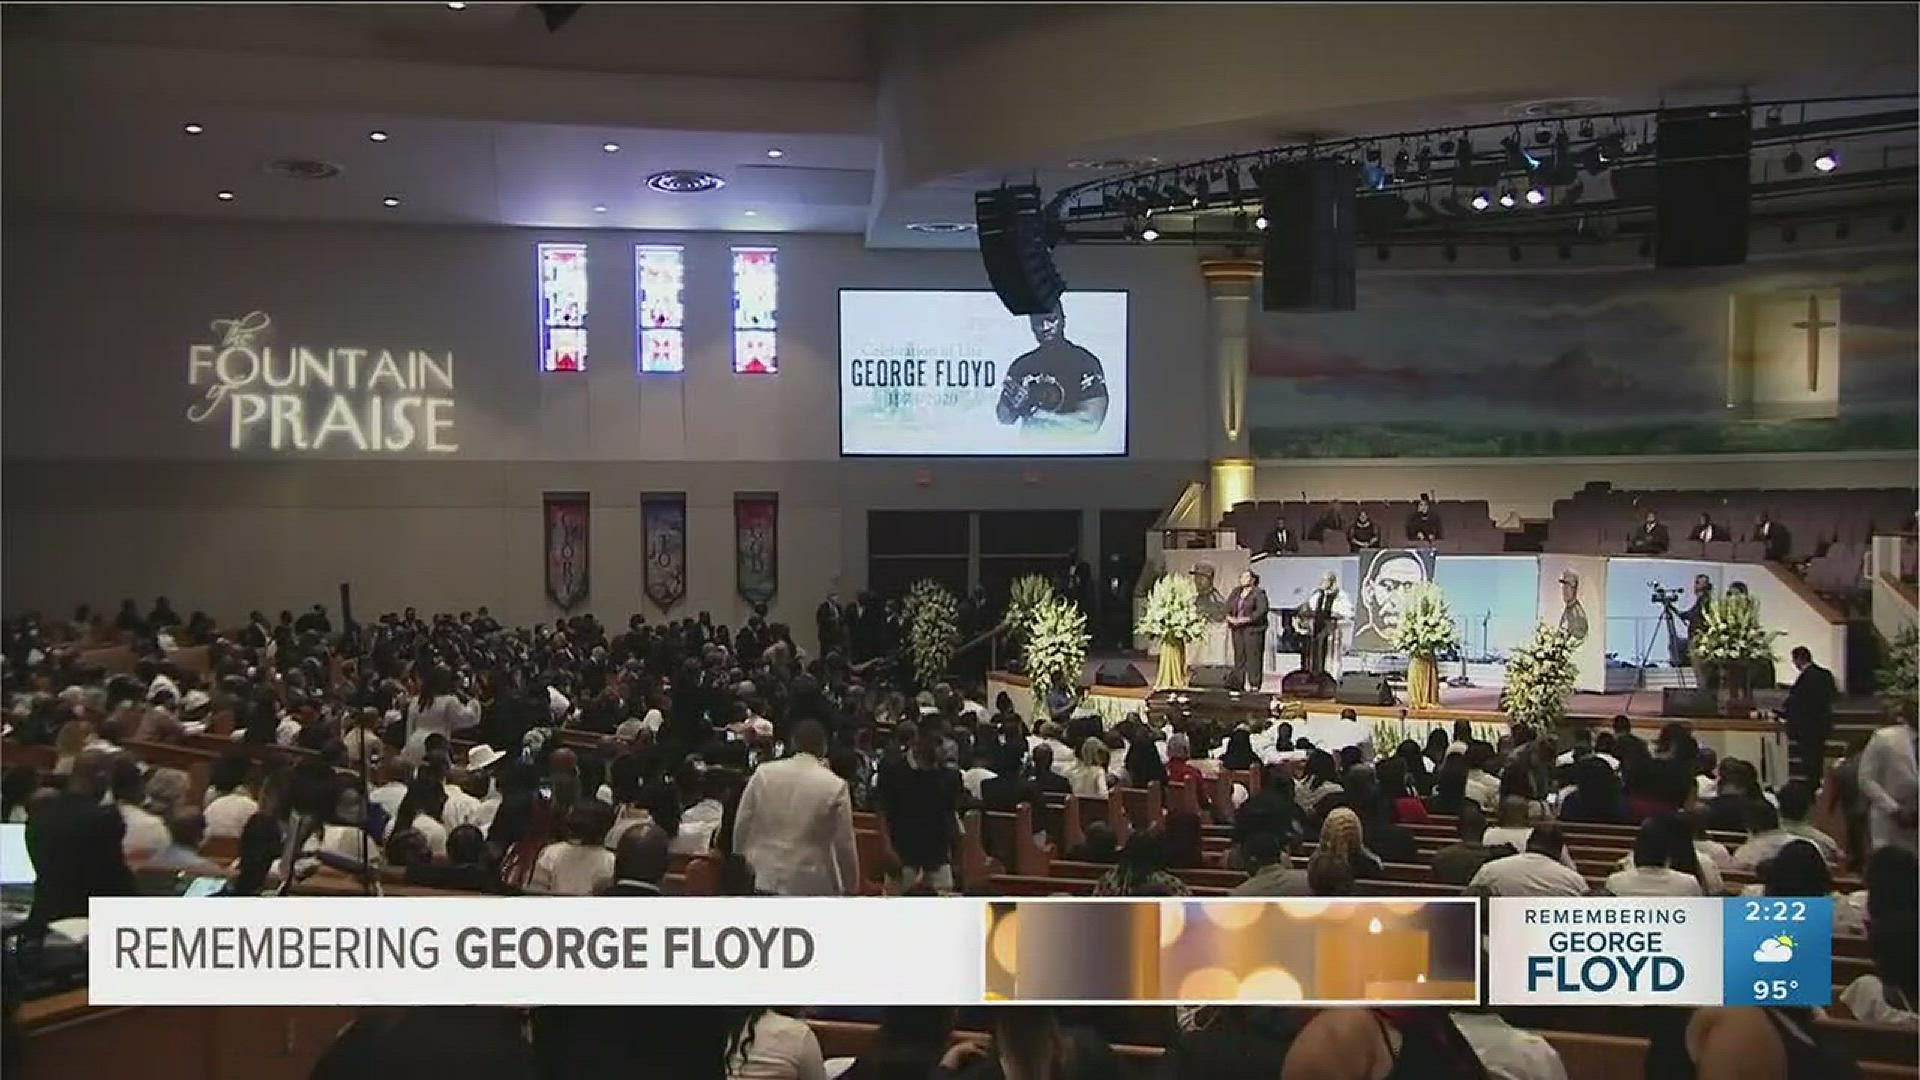 Rev. Al Sharpton delivered the eulogy Tuesday, recognizing other families mourning tragic losses, mourning George Floyd and calling for change.